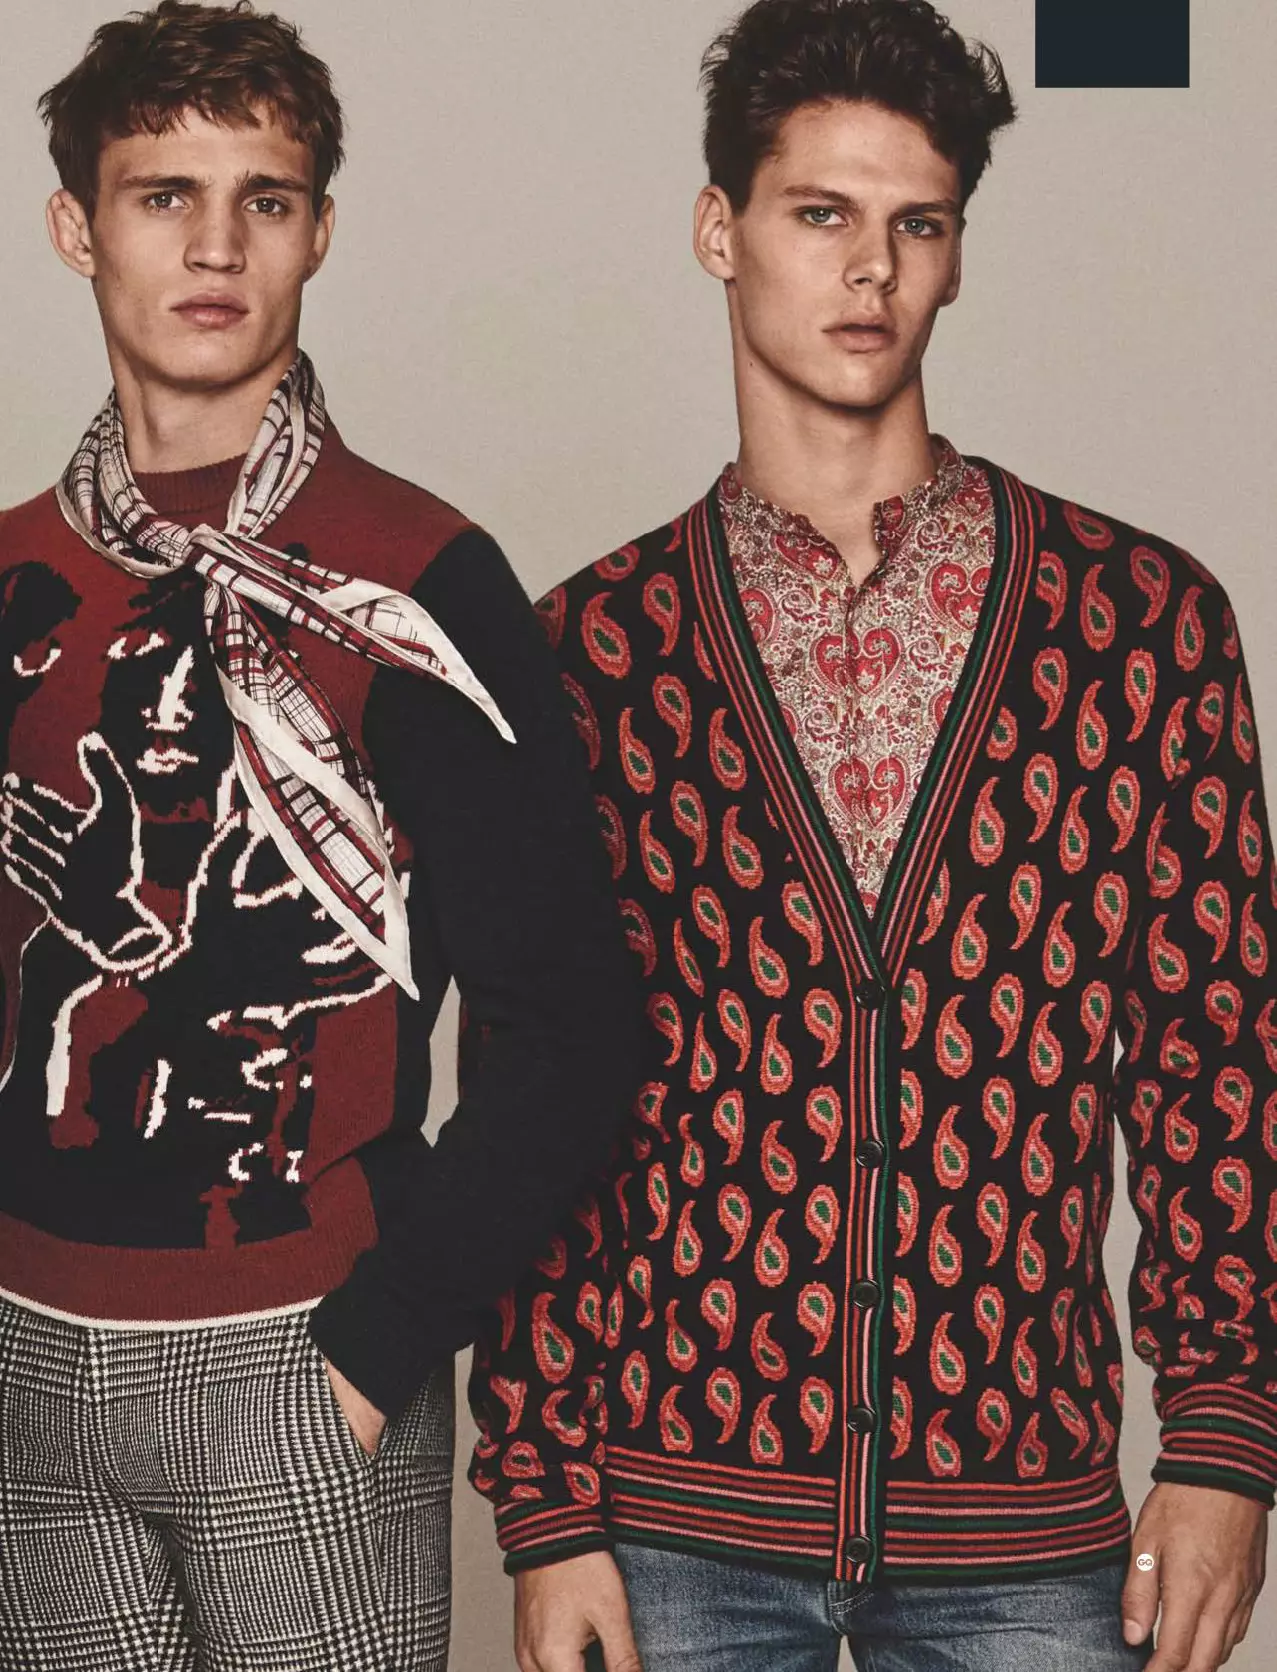 GQ UK September 2016: The GQ Collections Photographs oleh Giampaolo Sgura Styling oleh Luke Day